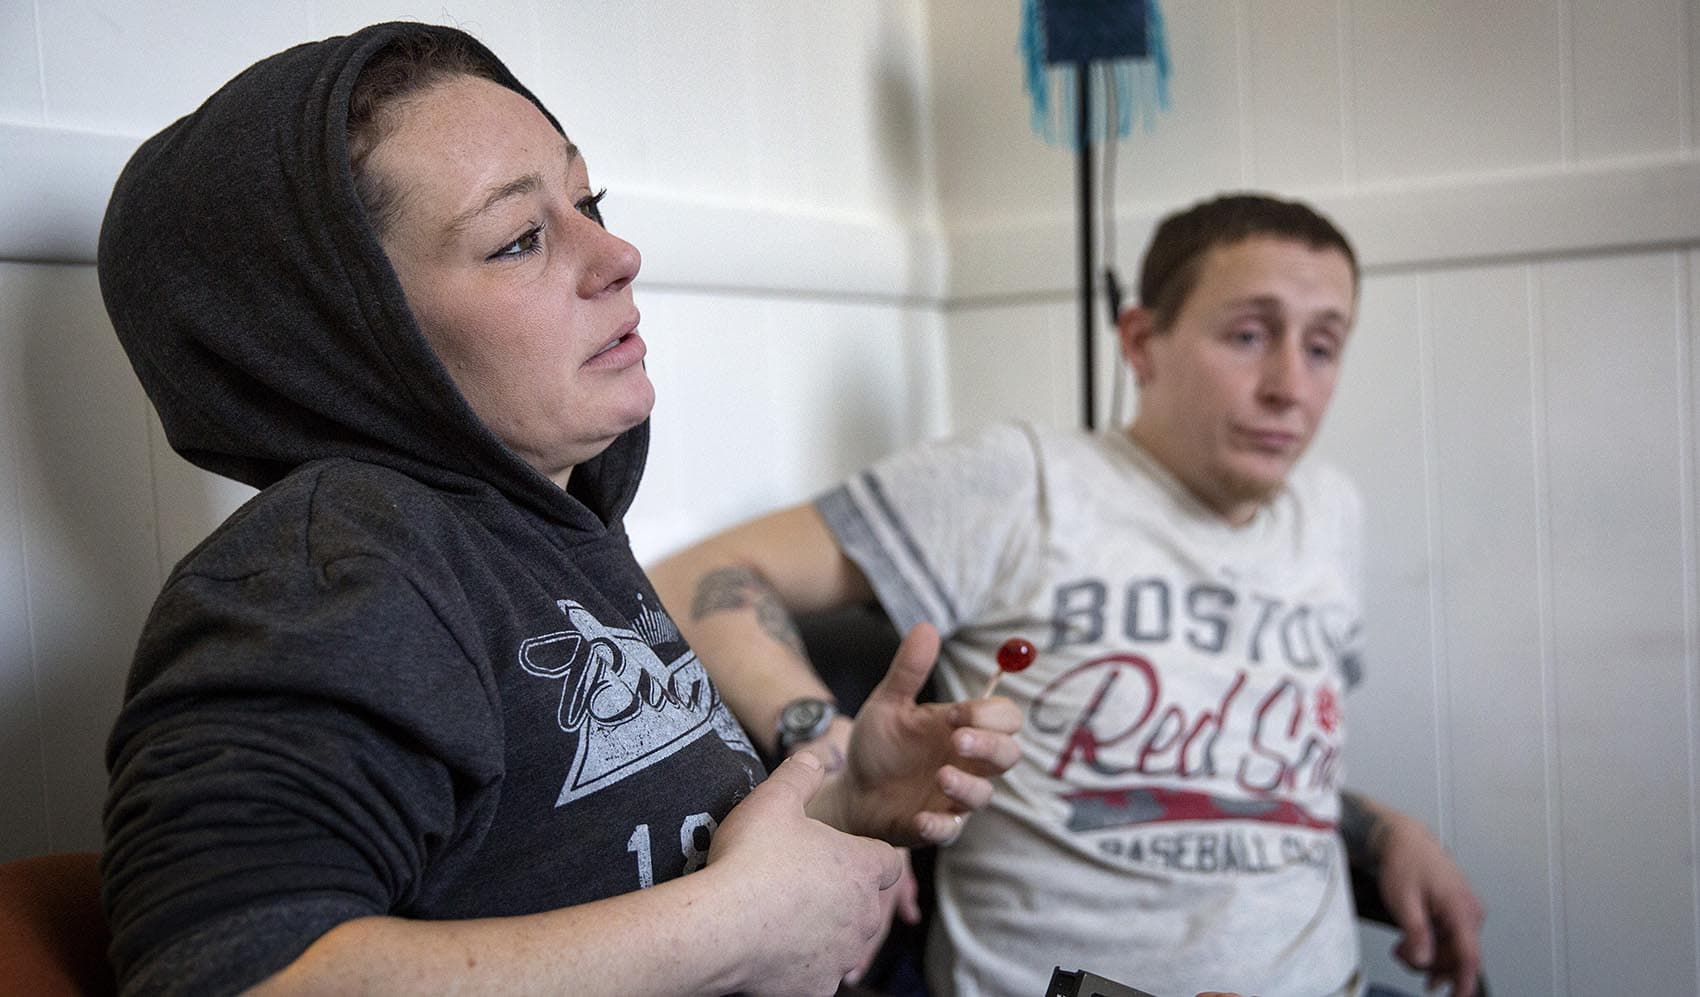 Allyson and Eddie, regular clients at the AAC Needle Exchange and Overdose Prevention Program in Cambridge, say they carry naloxone and try never to use drugs alone in case of an overdose. (Robin Lubbock/WBUR)